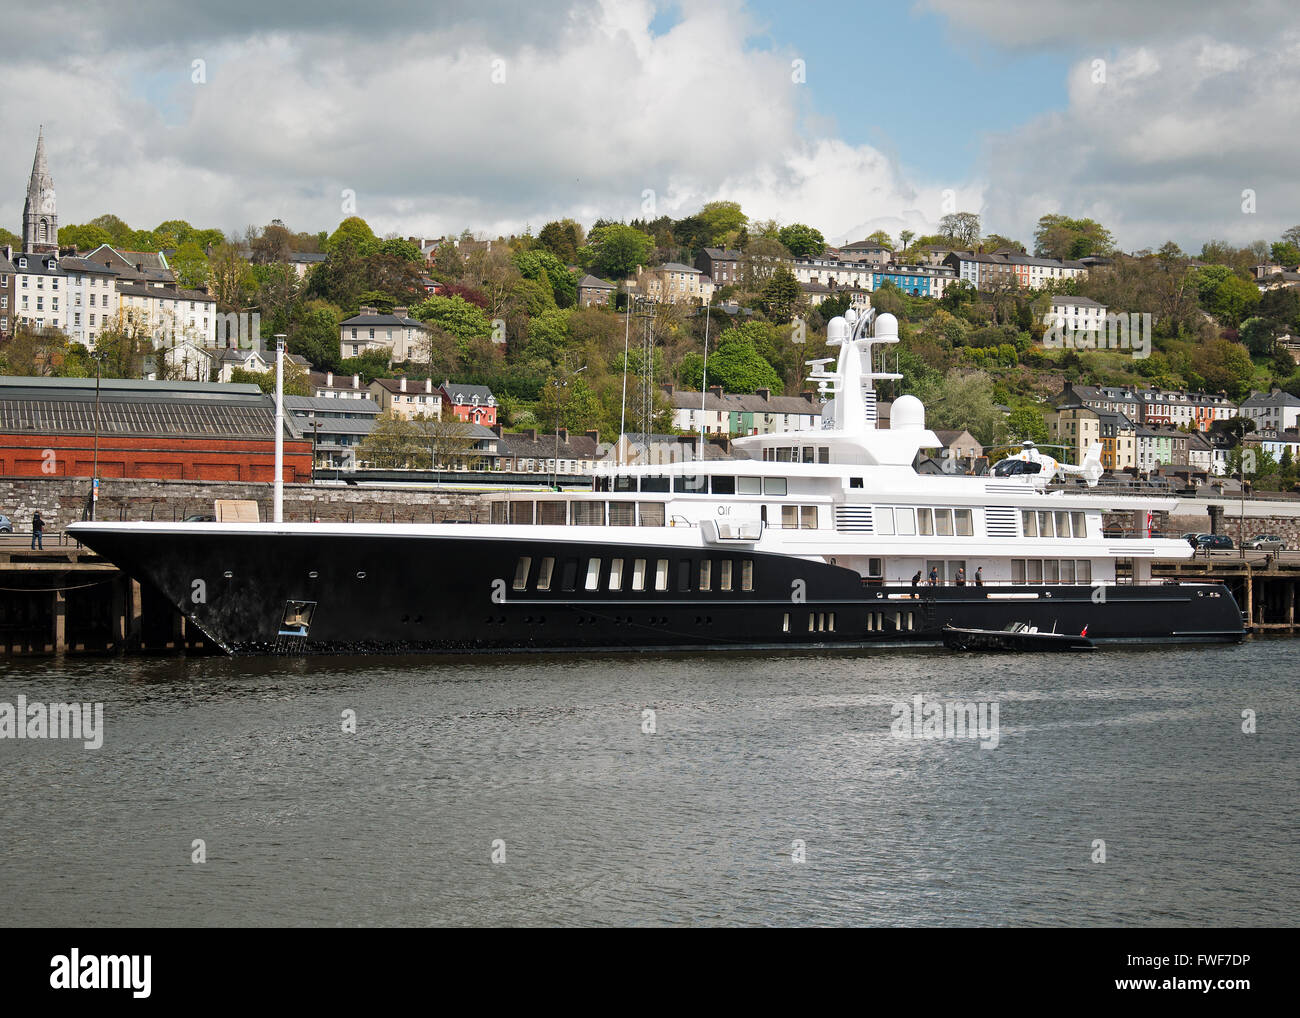 Super yacht Air moored in Cork city, Ireland Stock Photo